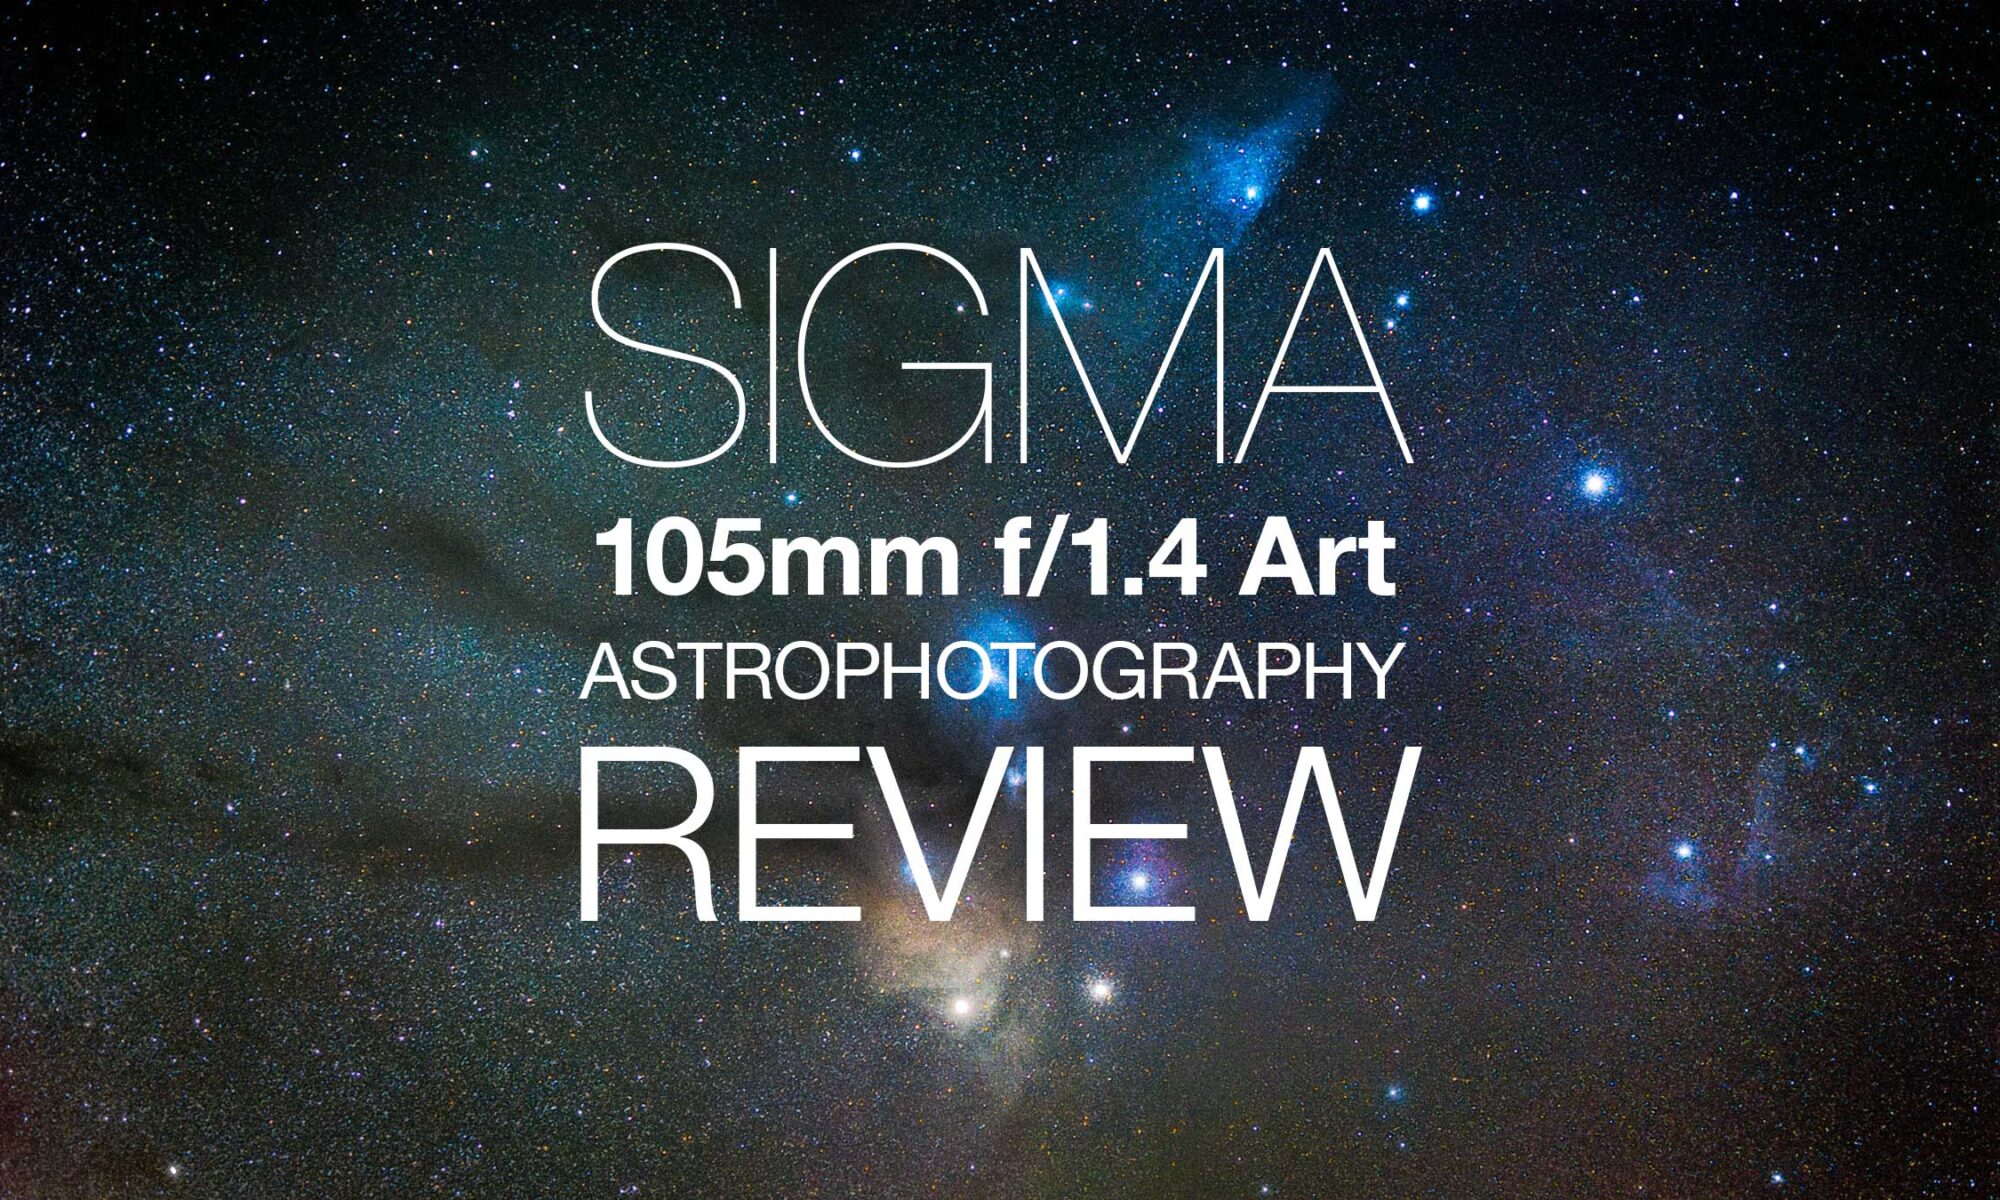 Sigma 105mm f/1.4 Art Astrophotography Lens Review